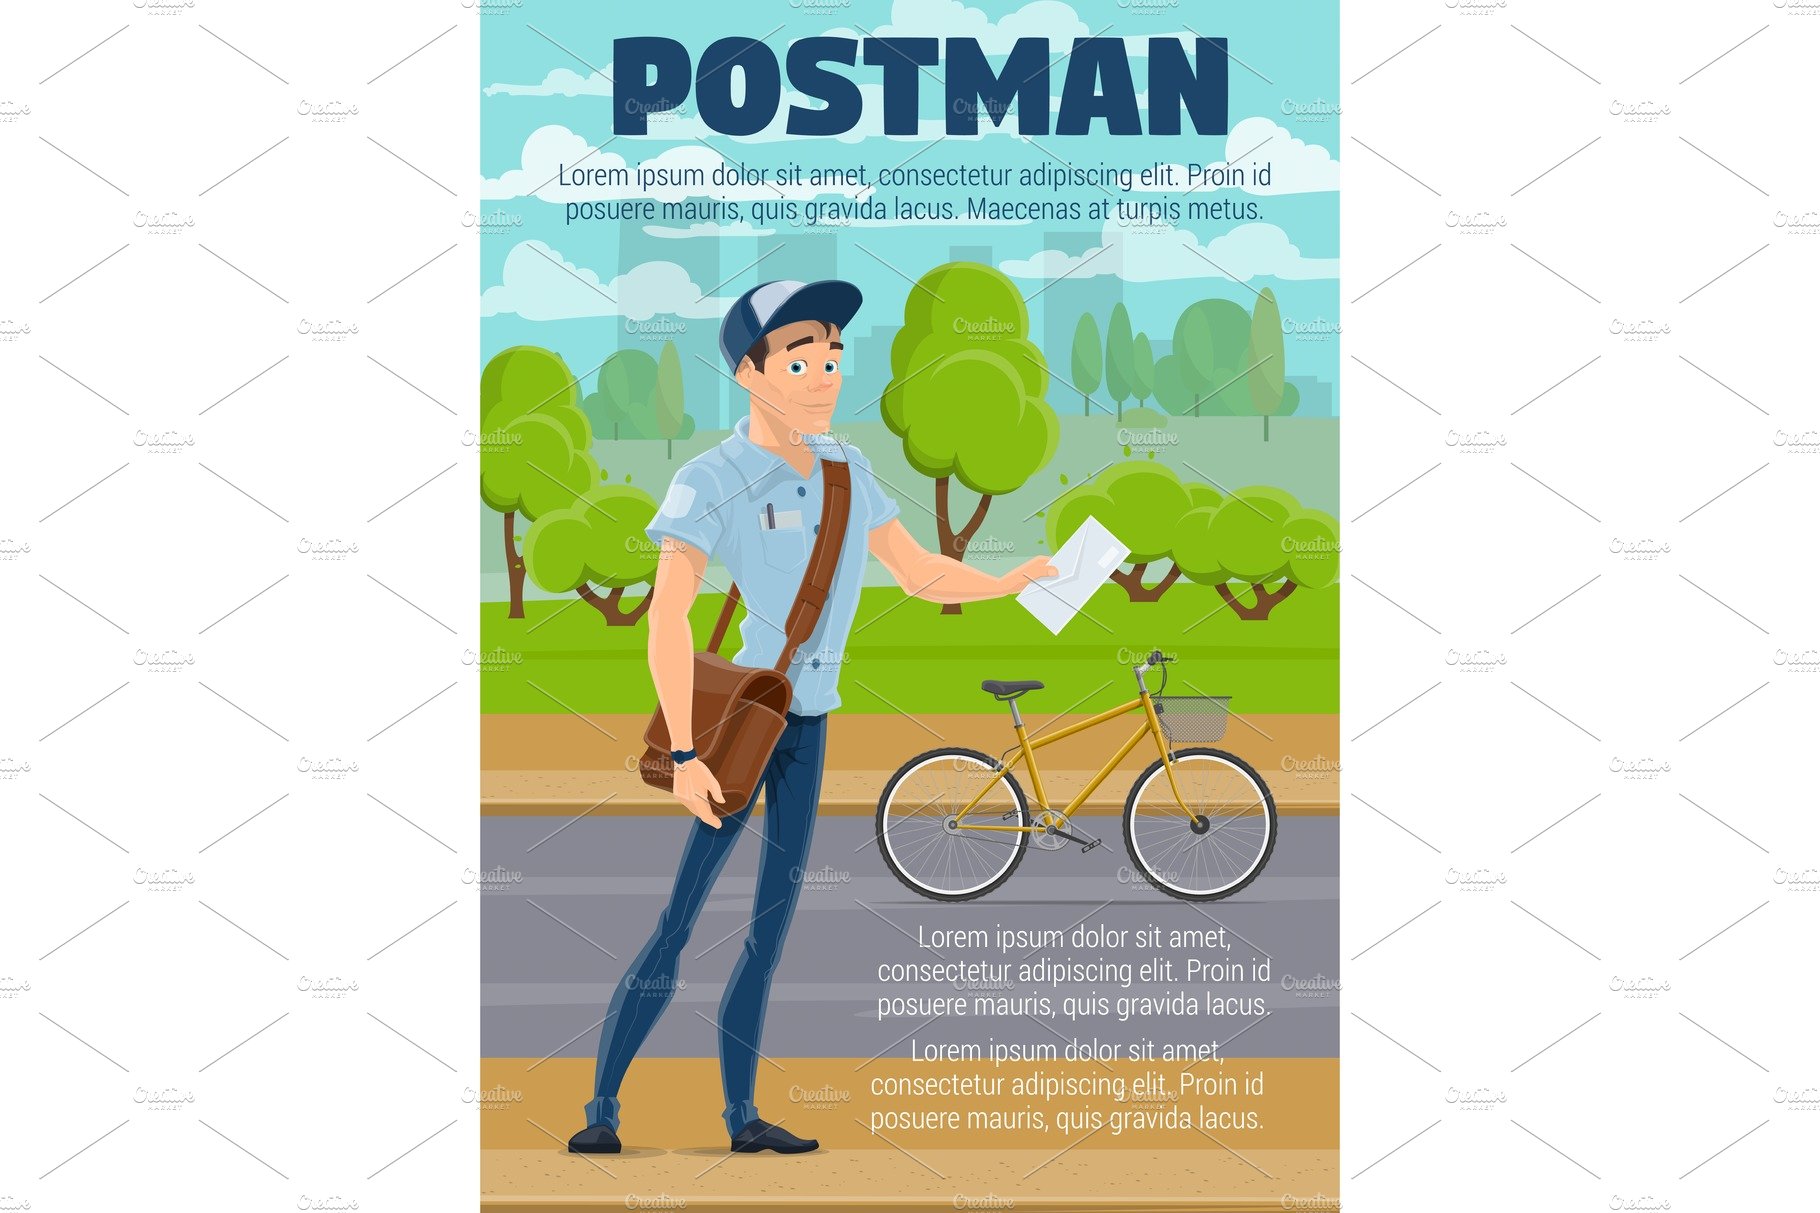 Postman with mail, letter and bike cover image.